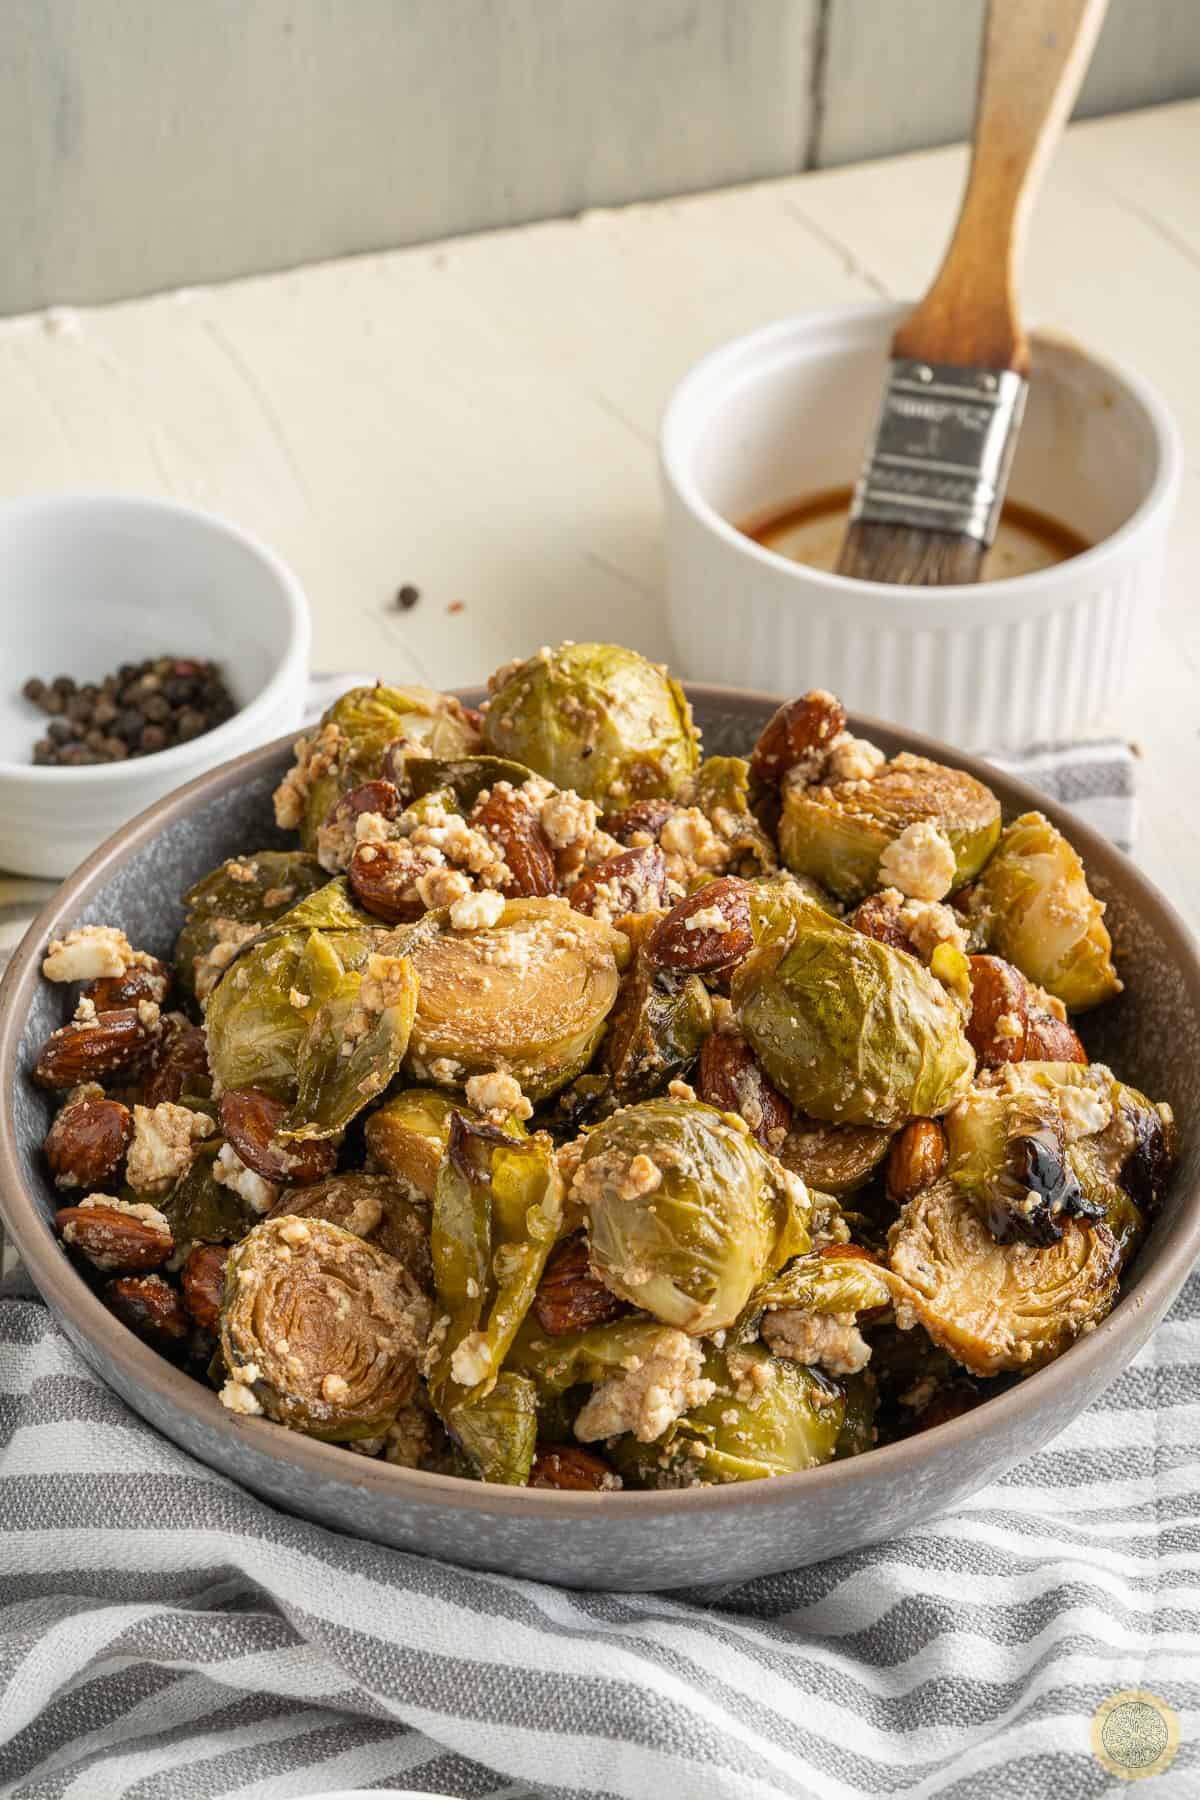 How to Prepare Brussel Sprouts for Cooking